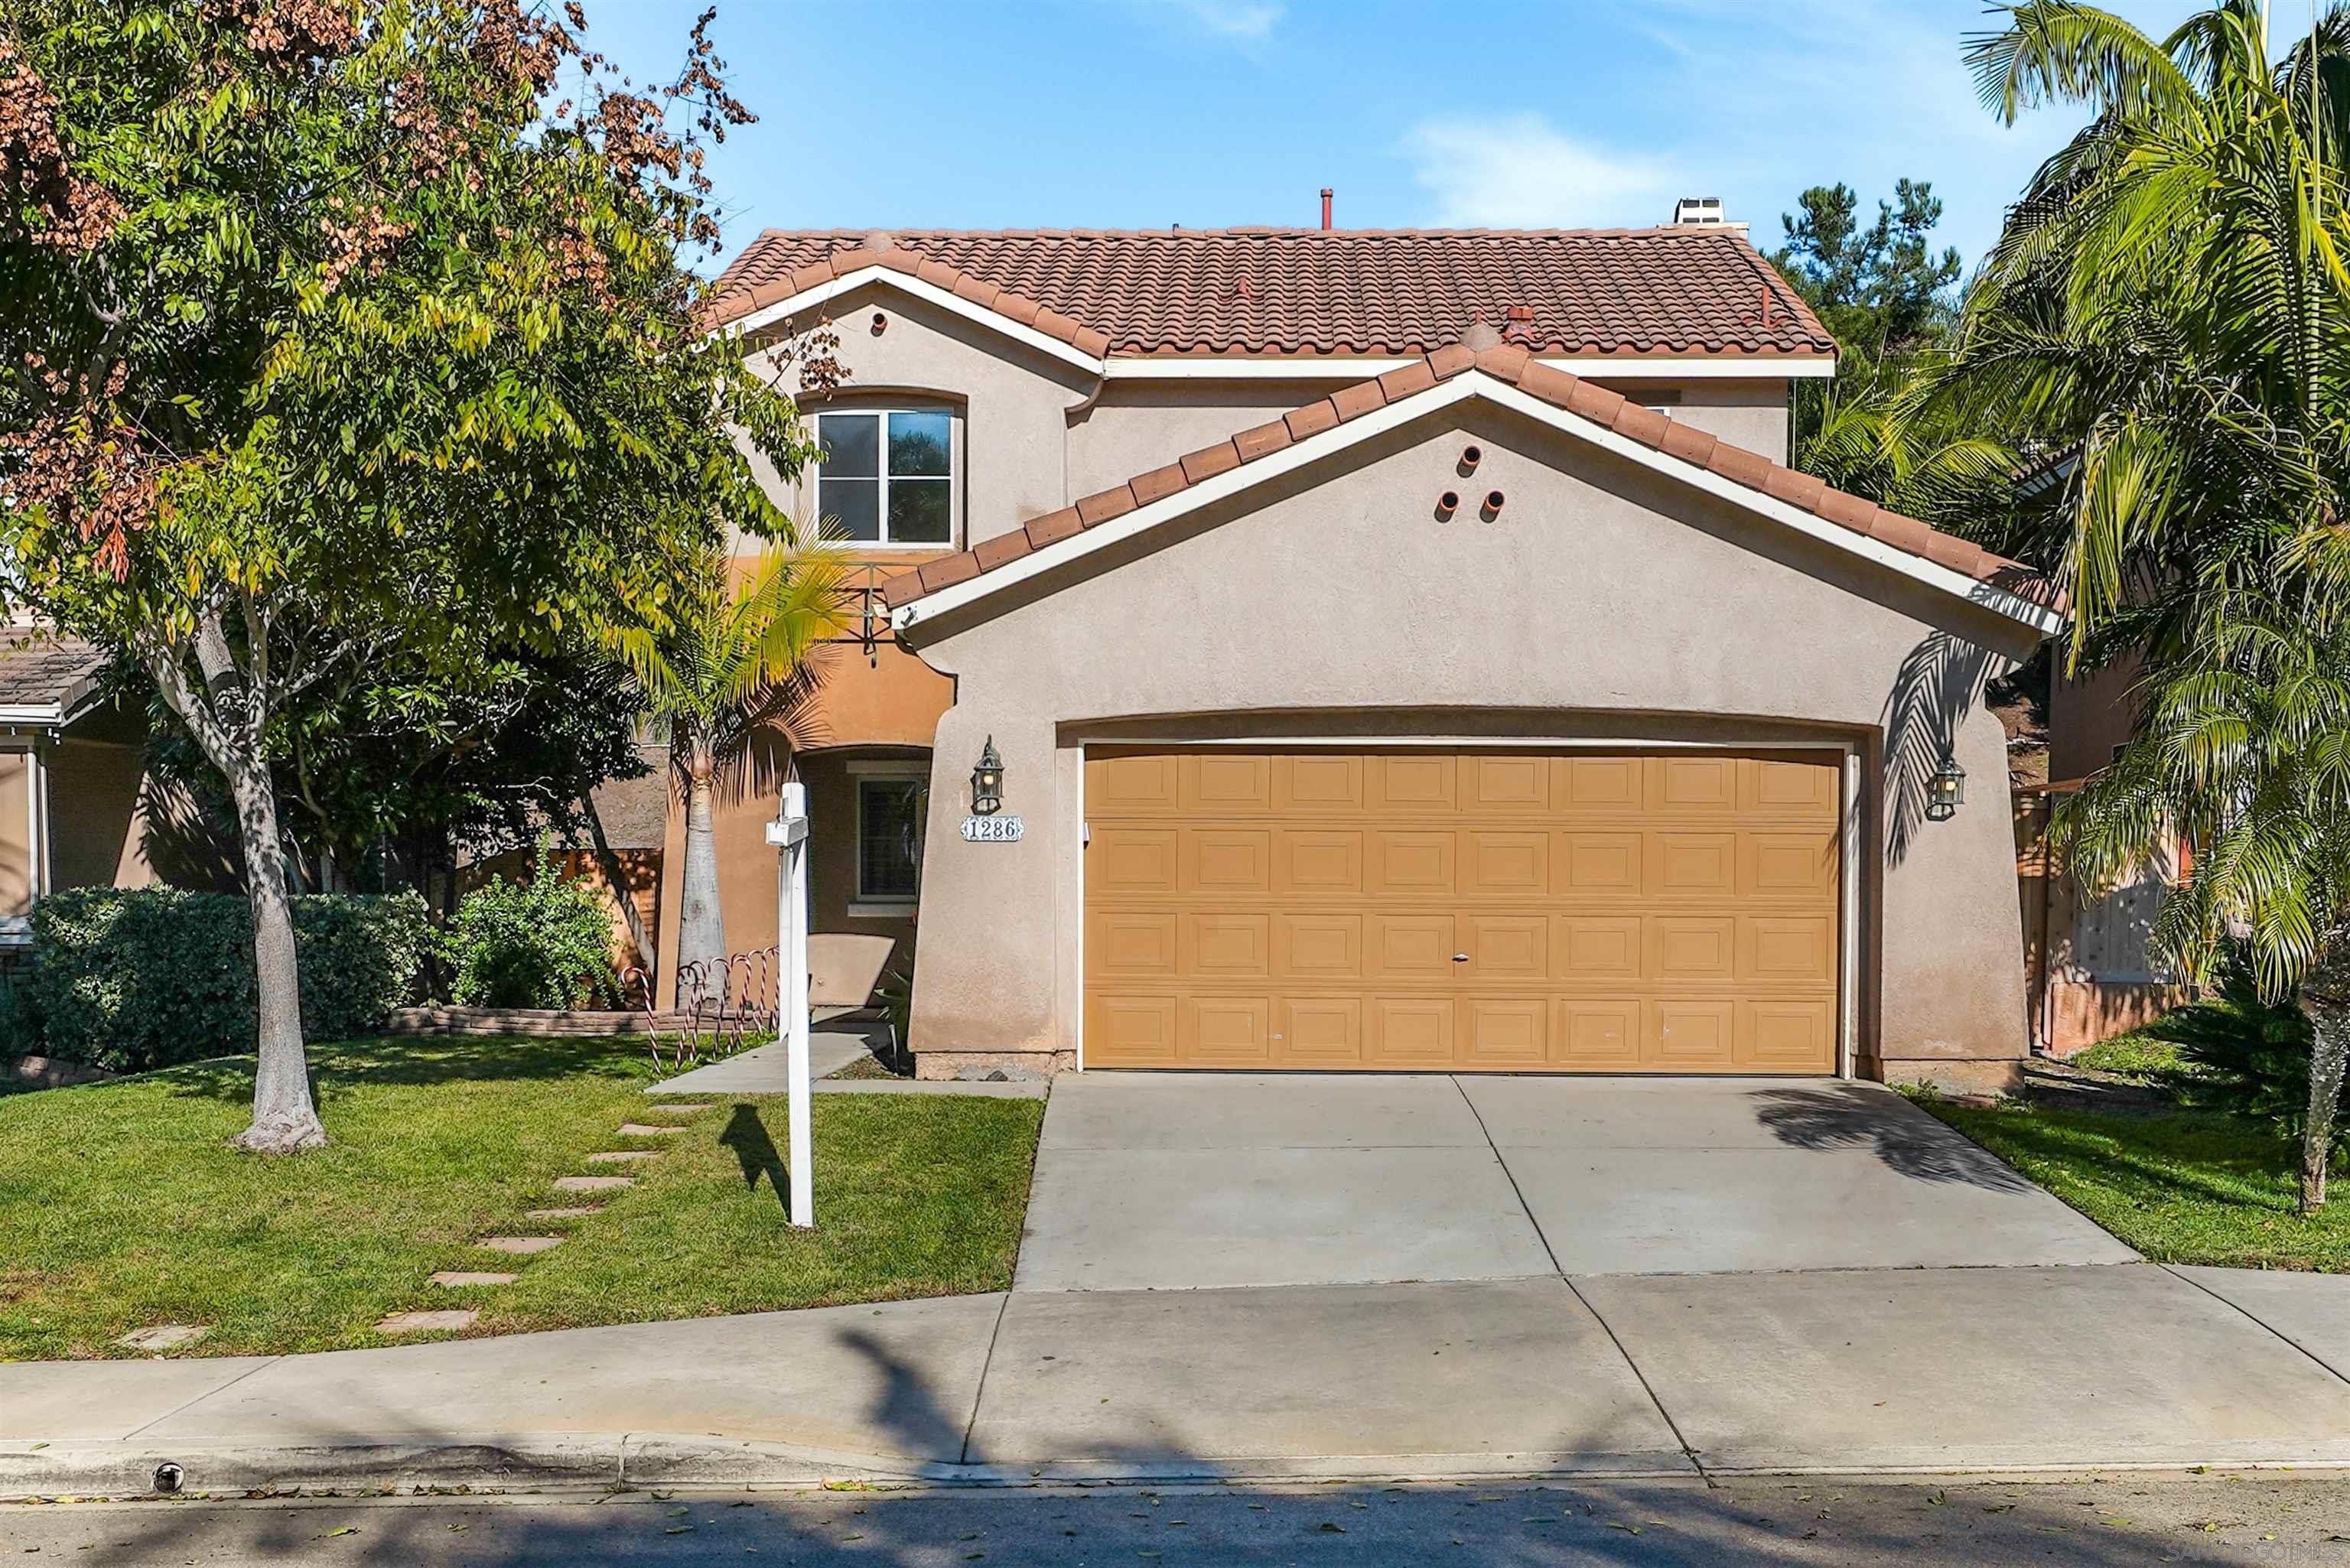 Recently sold a property at 1286 Avenida Fragata in San Marcos